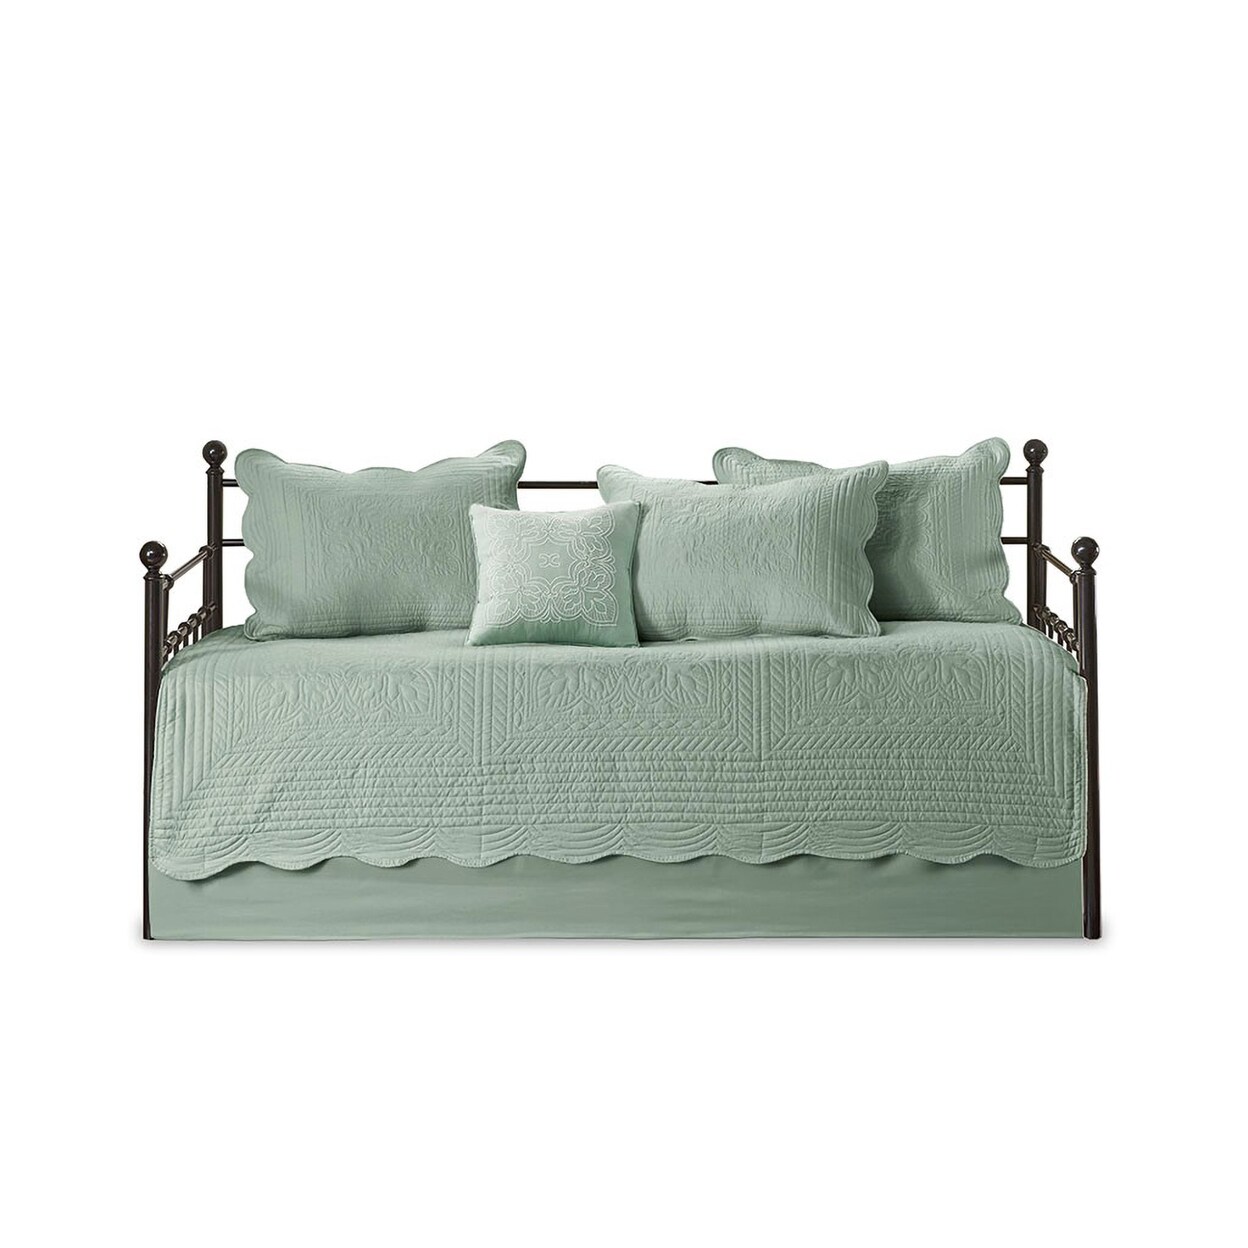 Gracie Mills   Salvatore 6-Piece Reversible Cottage-Inspired Scalloped Edges Daybed Set - GRACE-9624